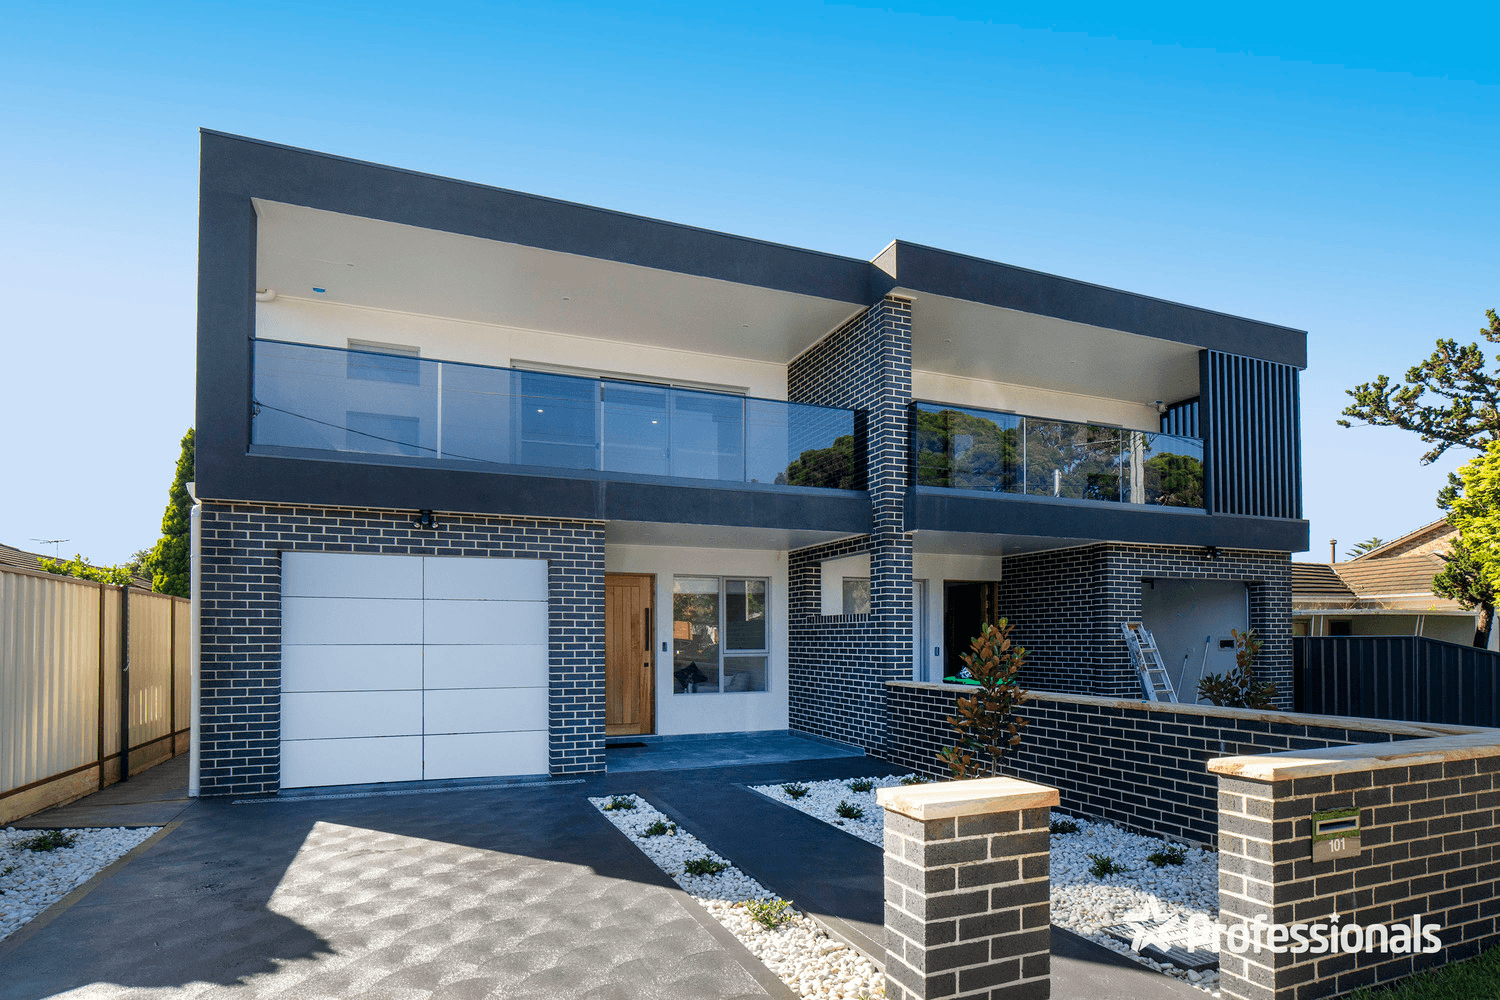 101 Queen Street, Revesby, NSW 2212